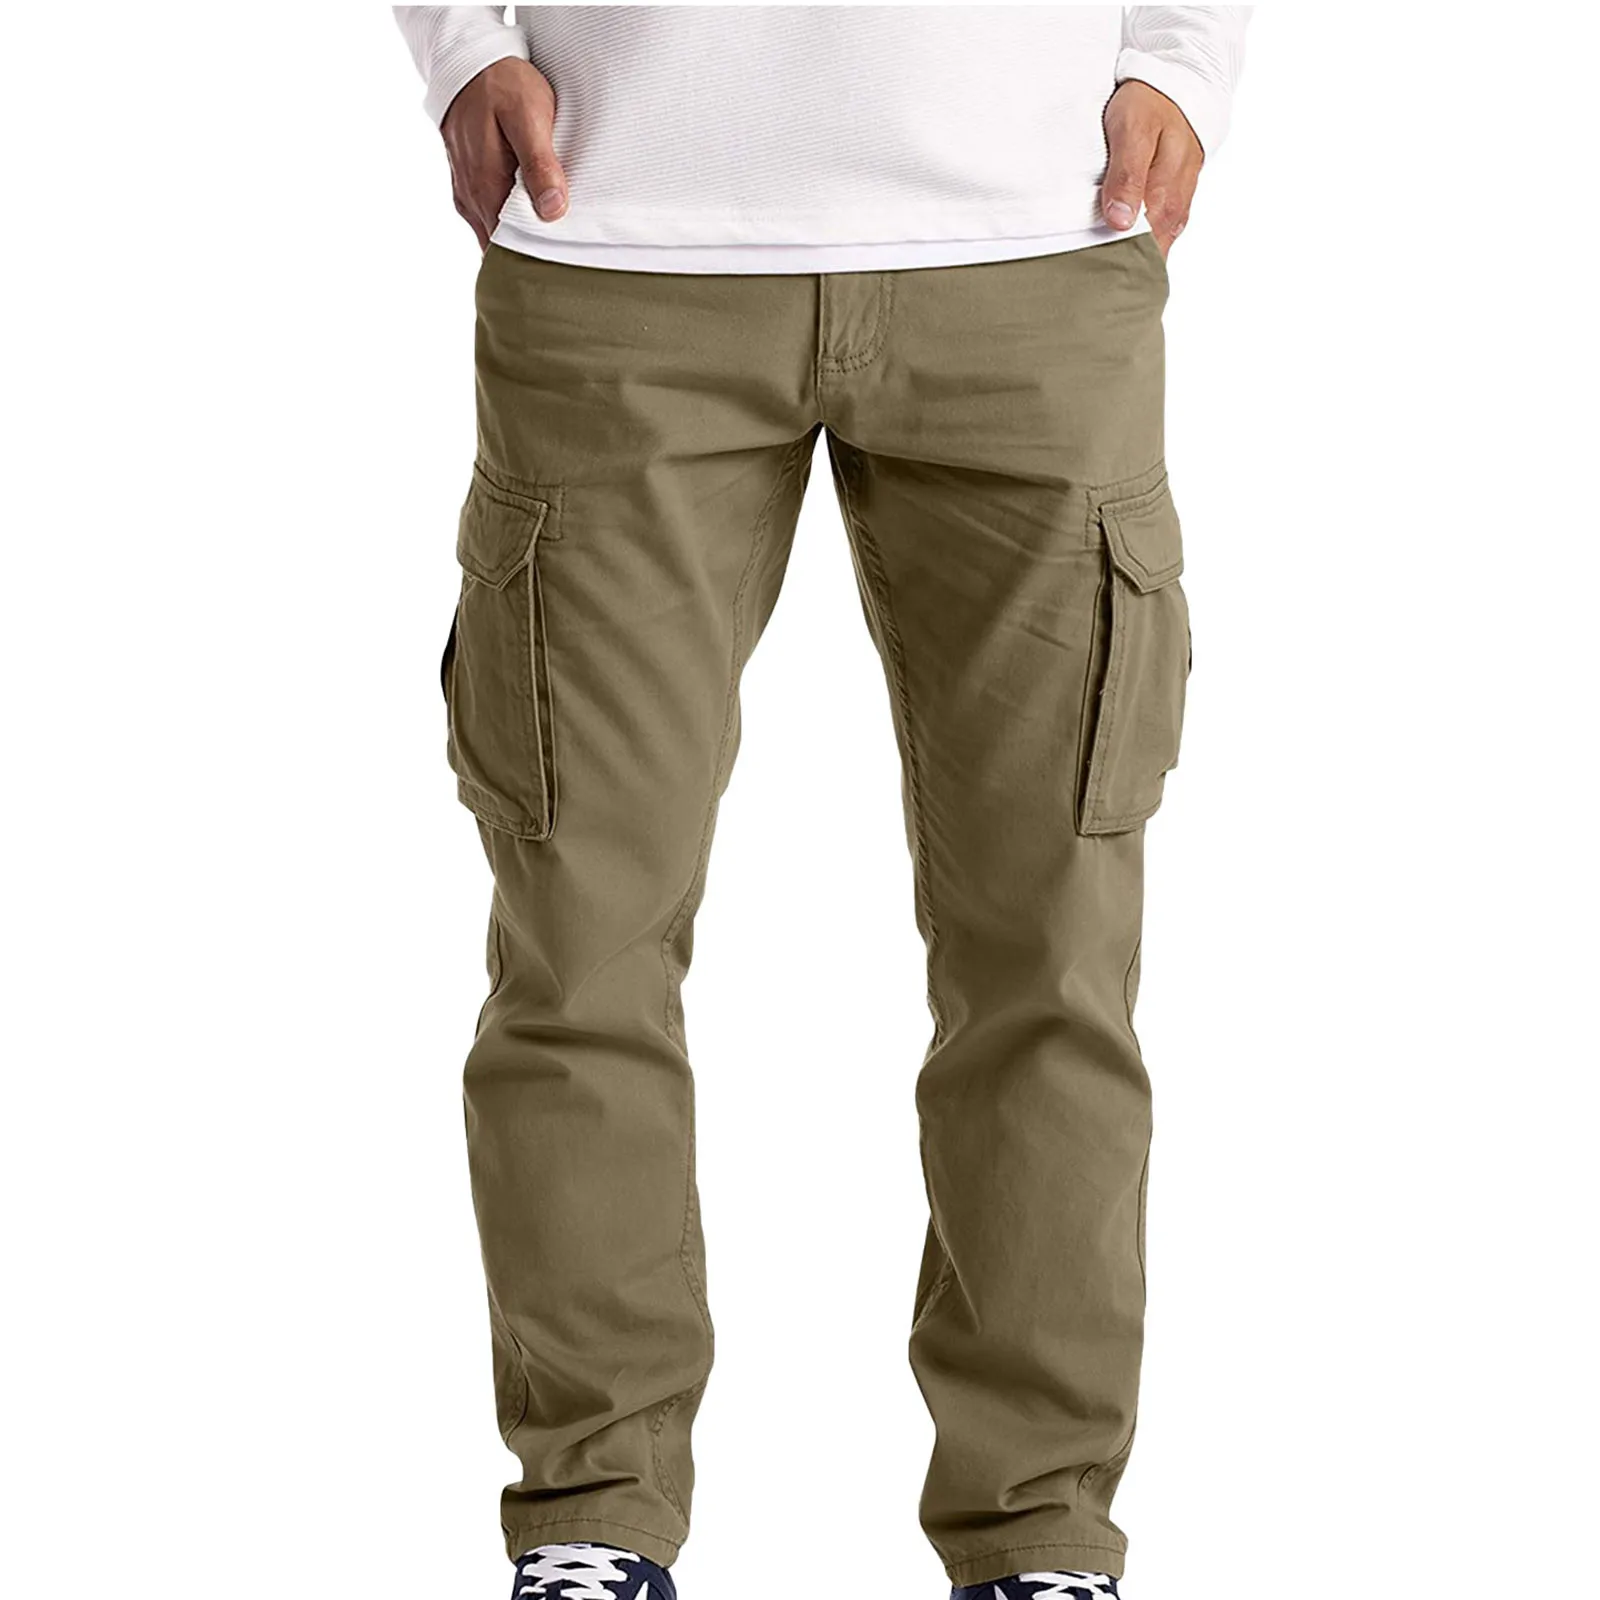 harem trousers Male Casual Pants Jeans Men's Cargo Trousers Work Wear Combat Safety Cargo 6 Pocket Full Pants hombr joggers masculino jeans#go alibaba pants